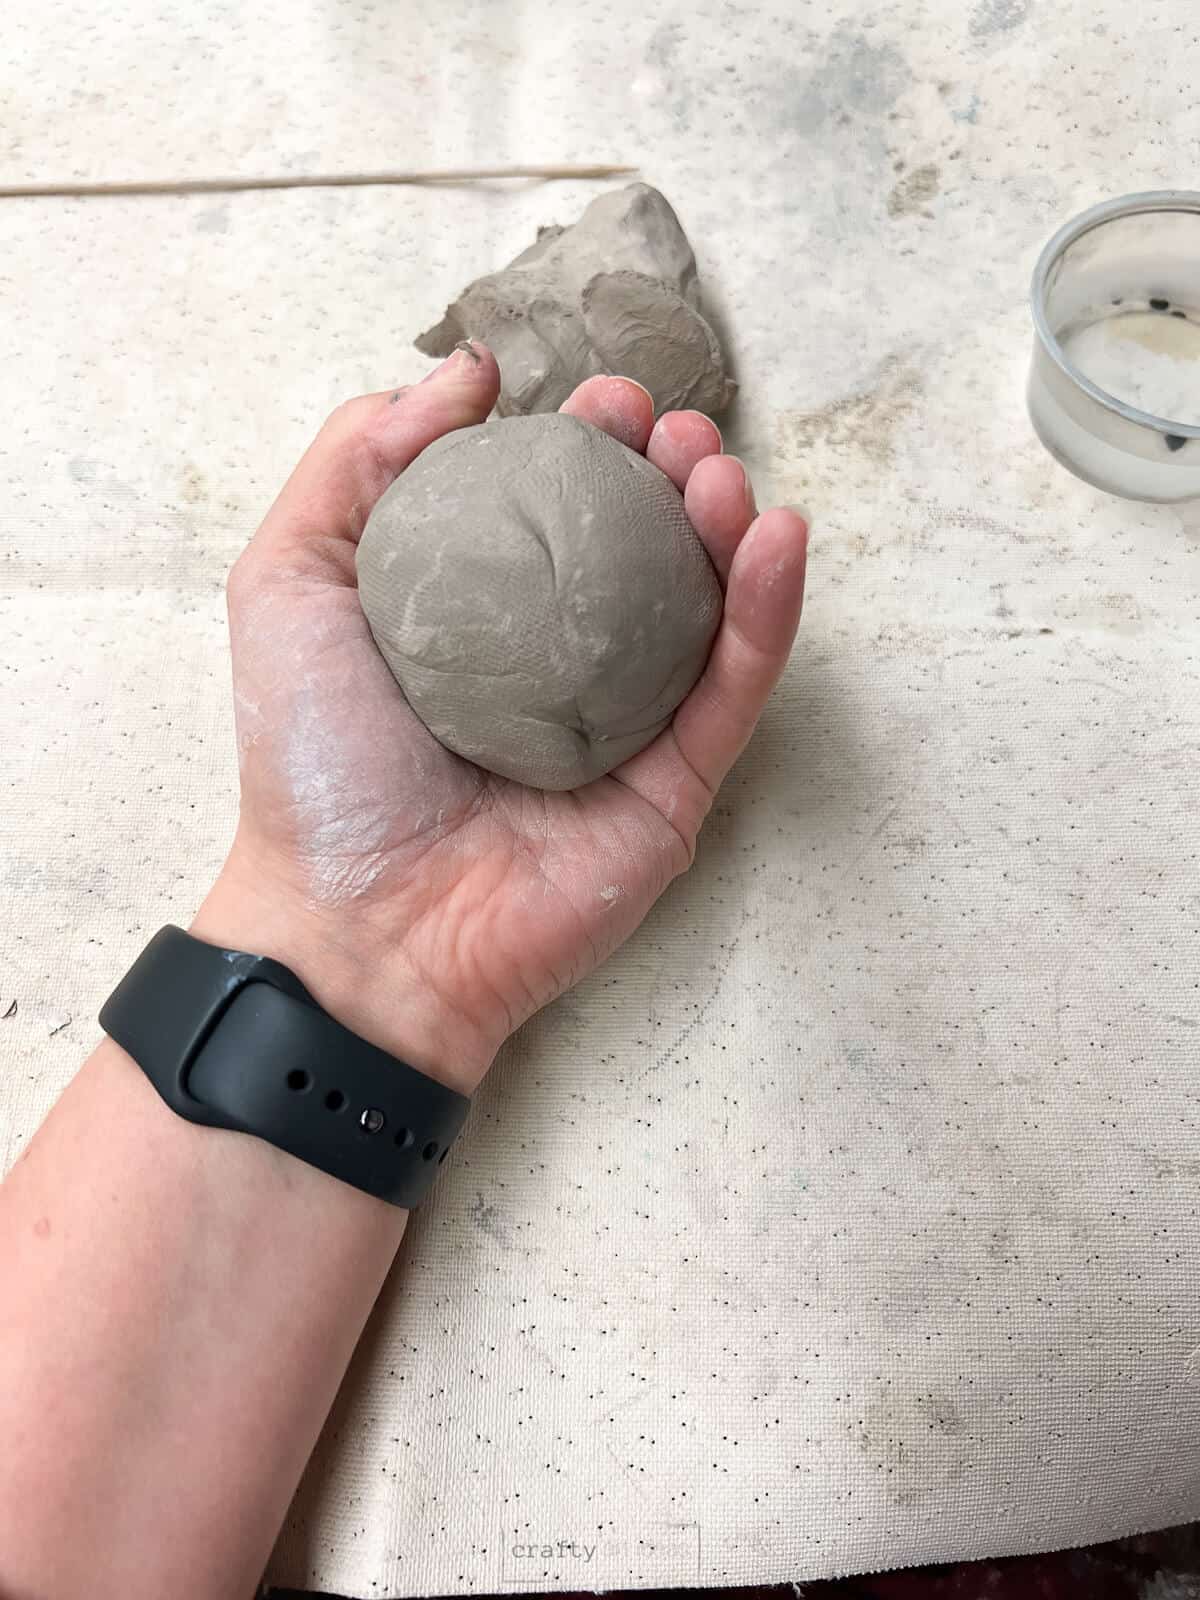 Ball of clay in hand over clay placemat.